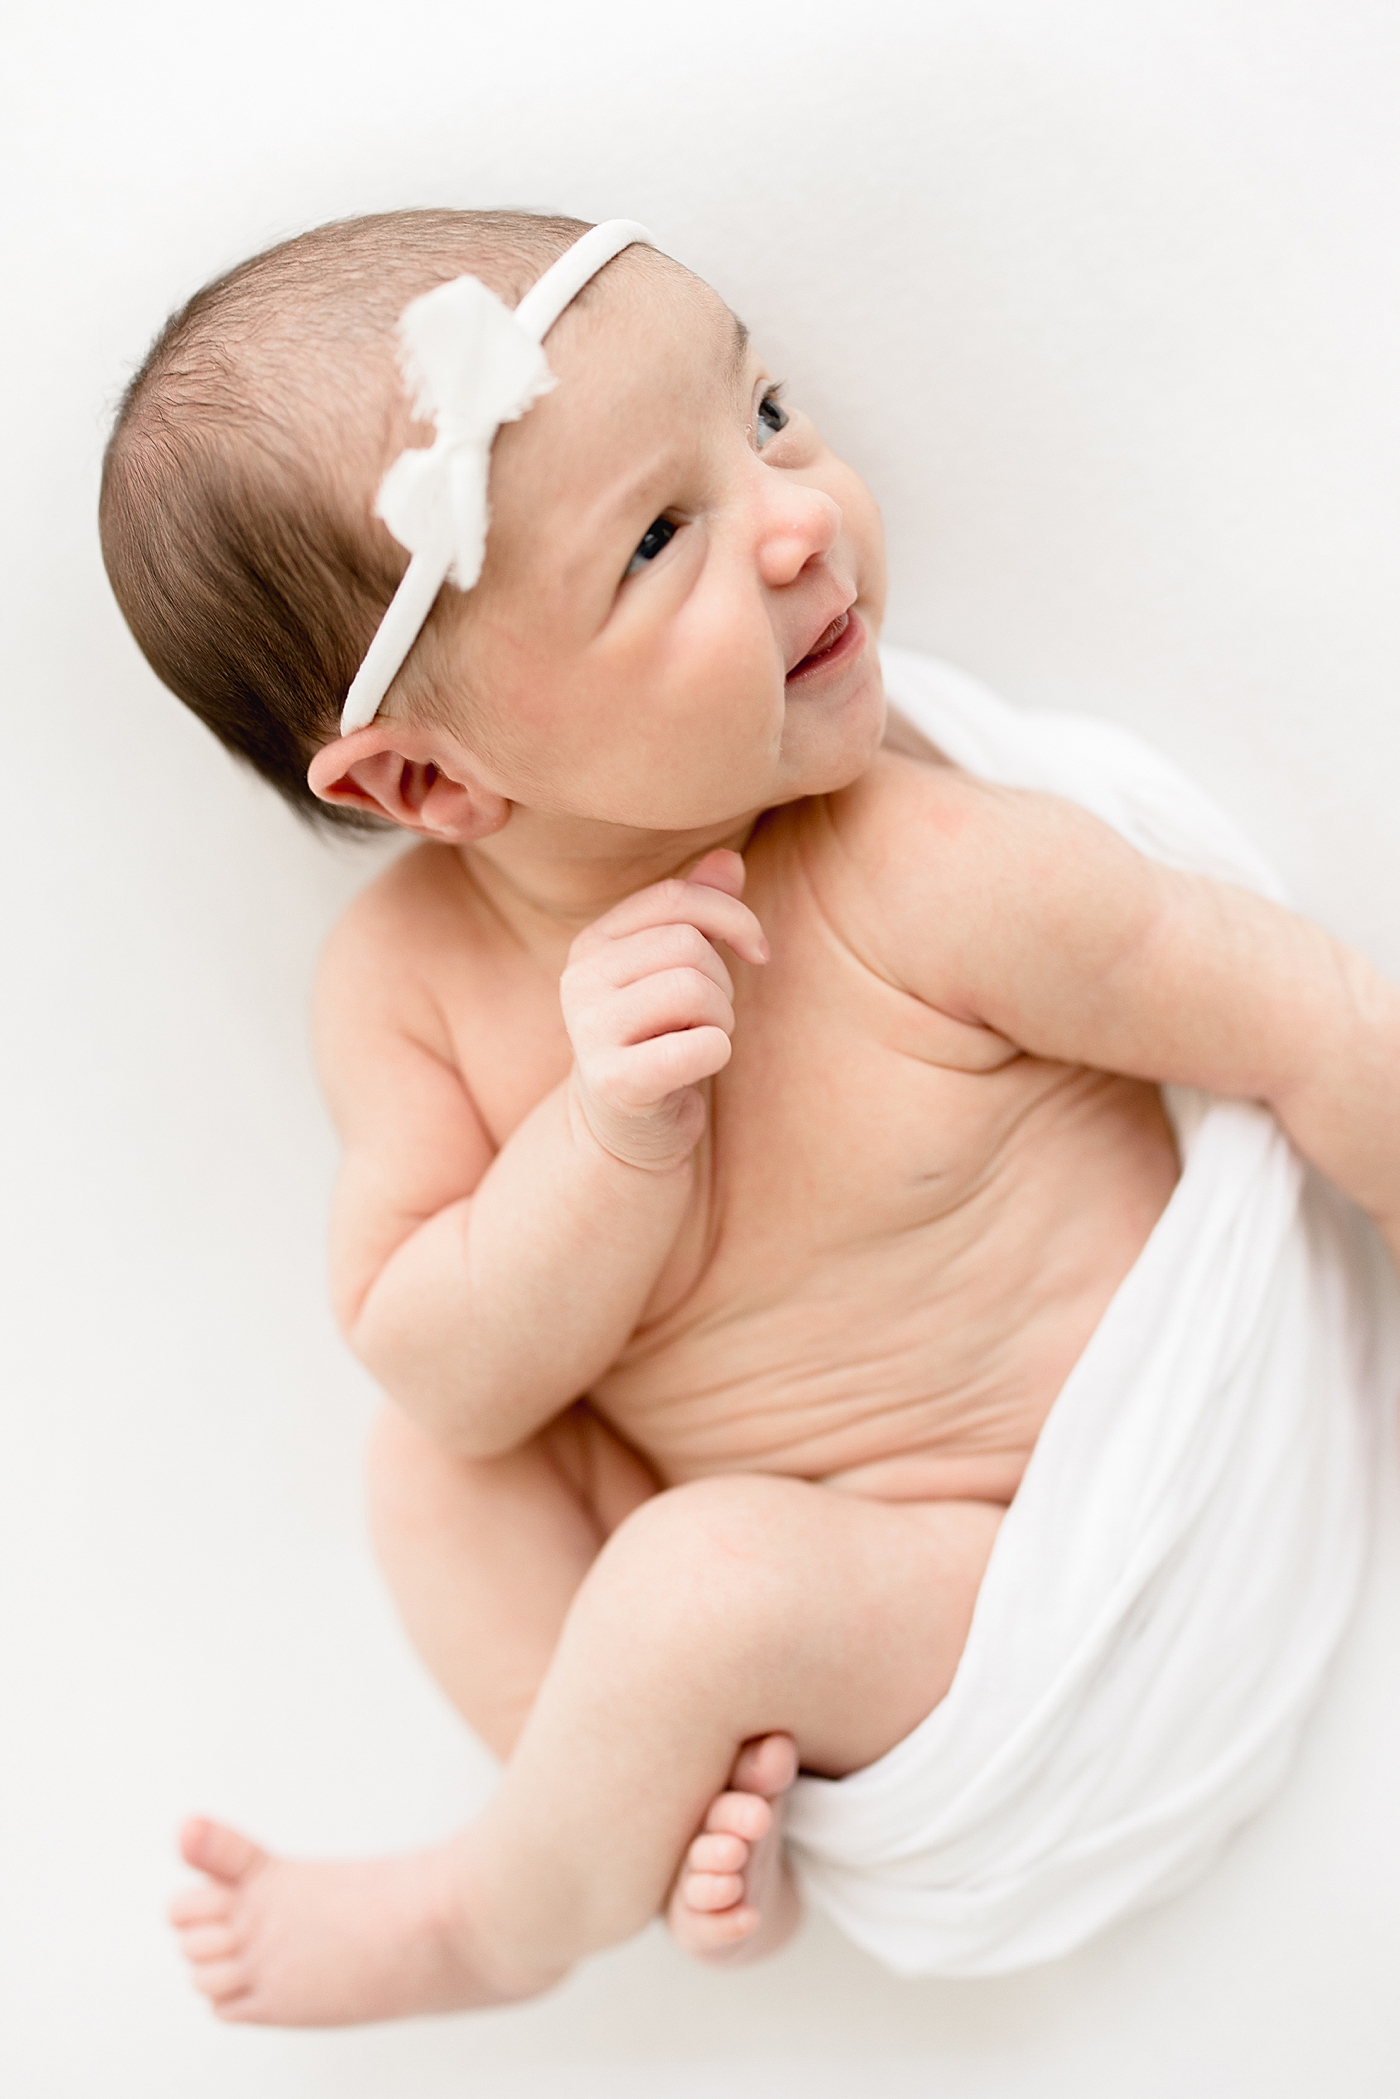 Baby girl swaddled in white blanket with white headband. Photo by Brittany Elise Photography.